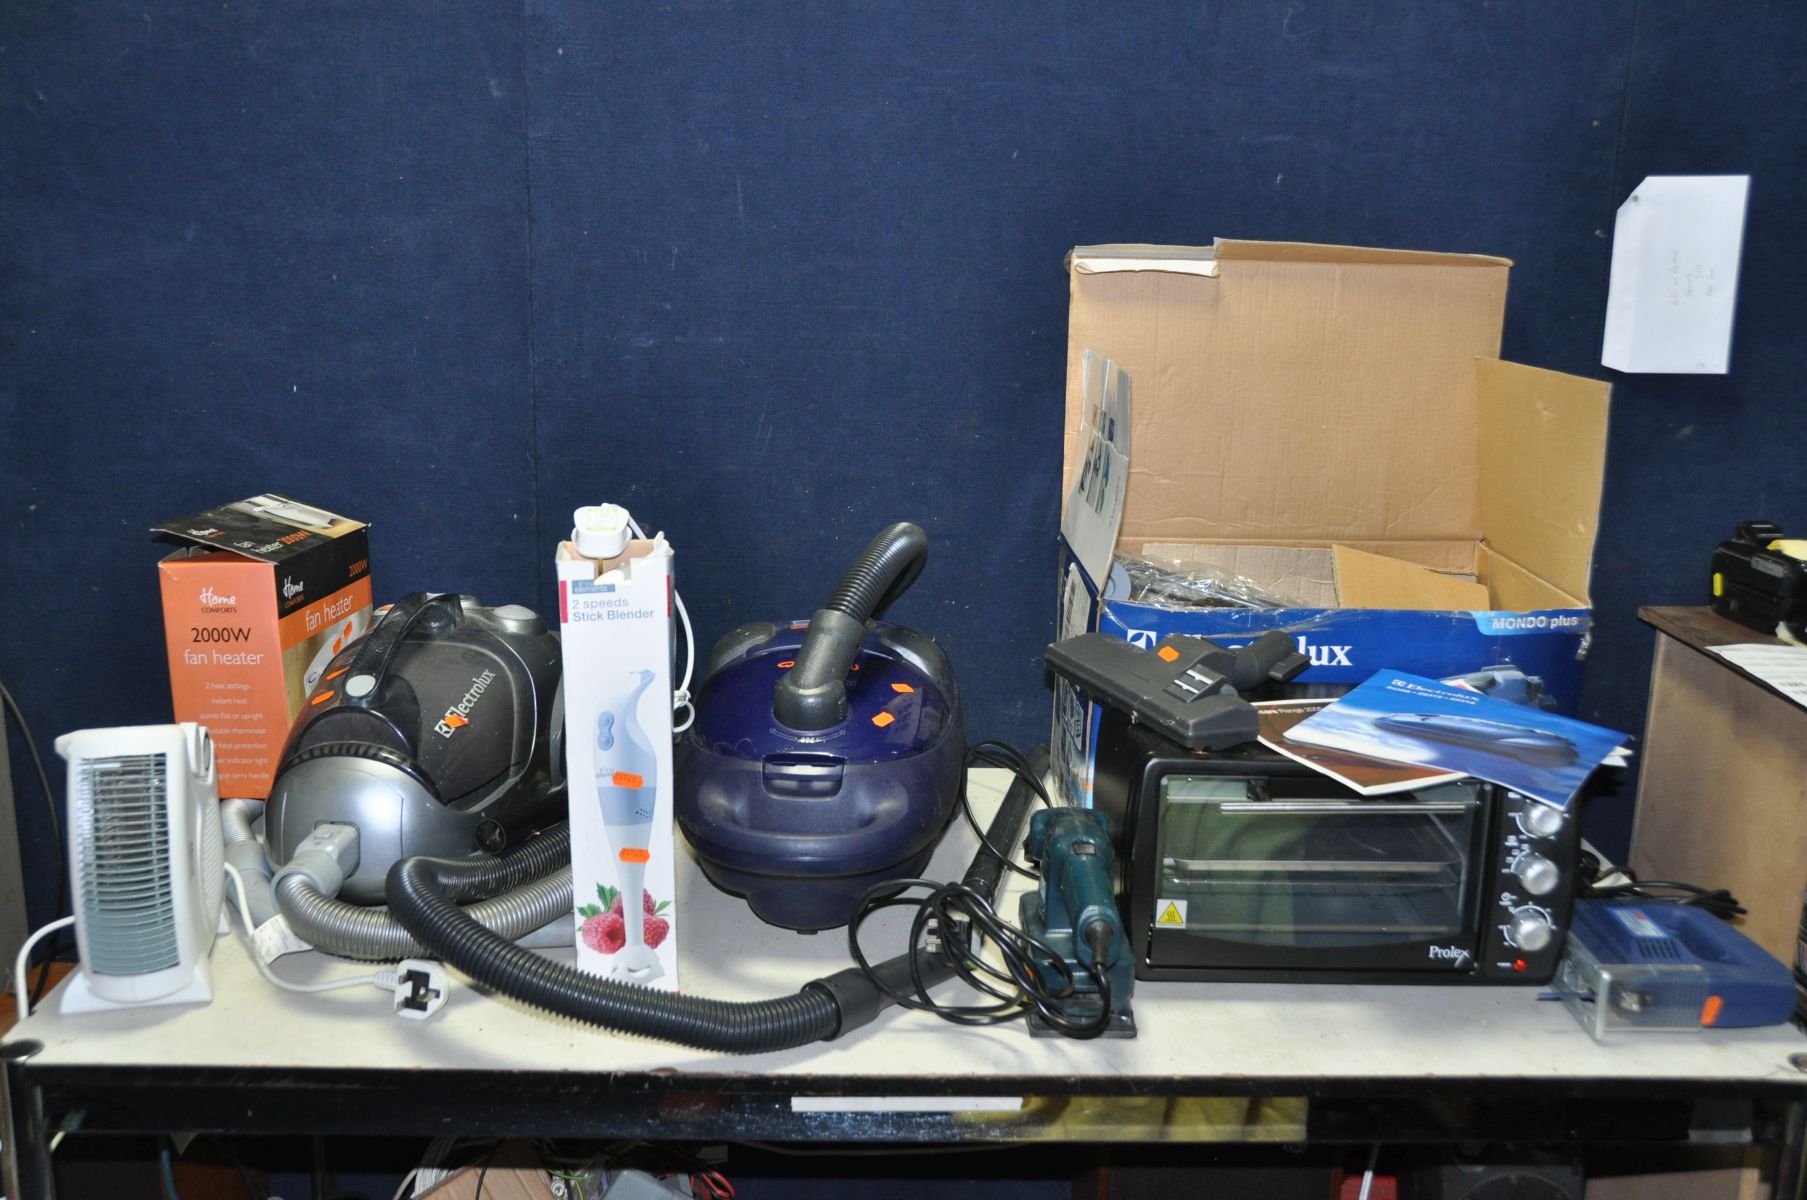 A COLLECTION OF HOUSEHOLD ELECTRICALS including a brand new in box Electrolux Mondo Plus vacuum